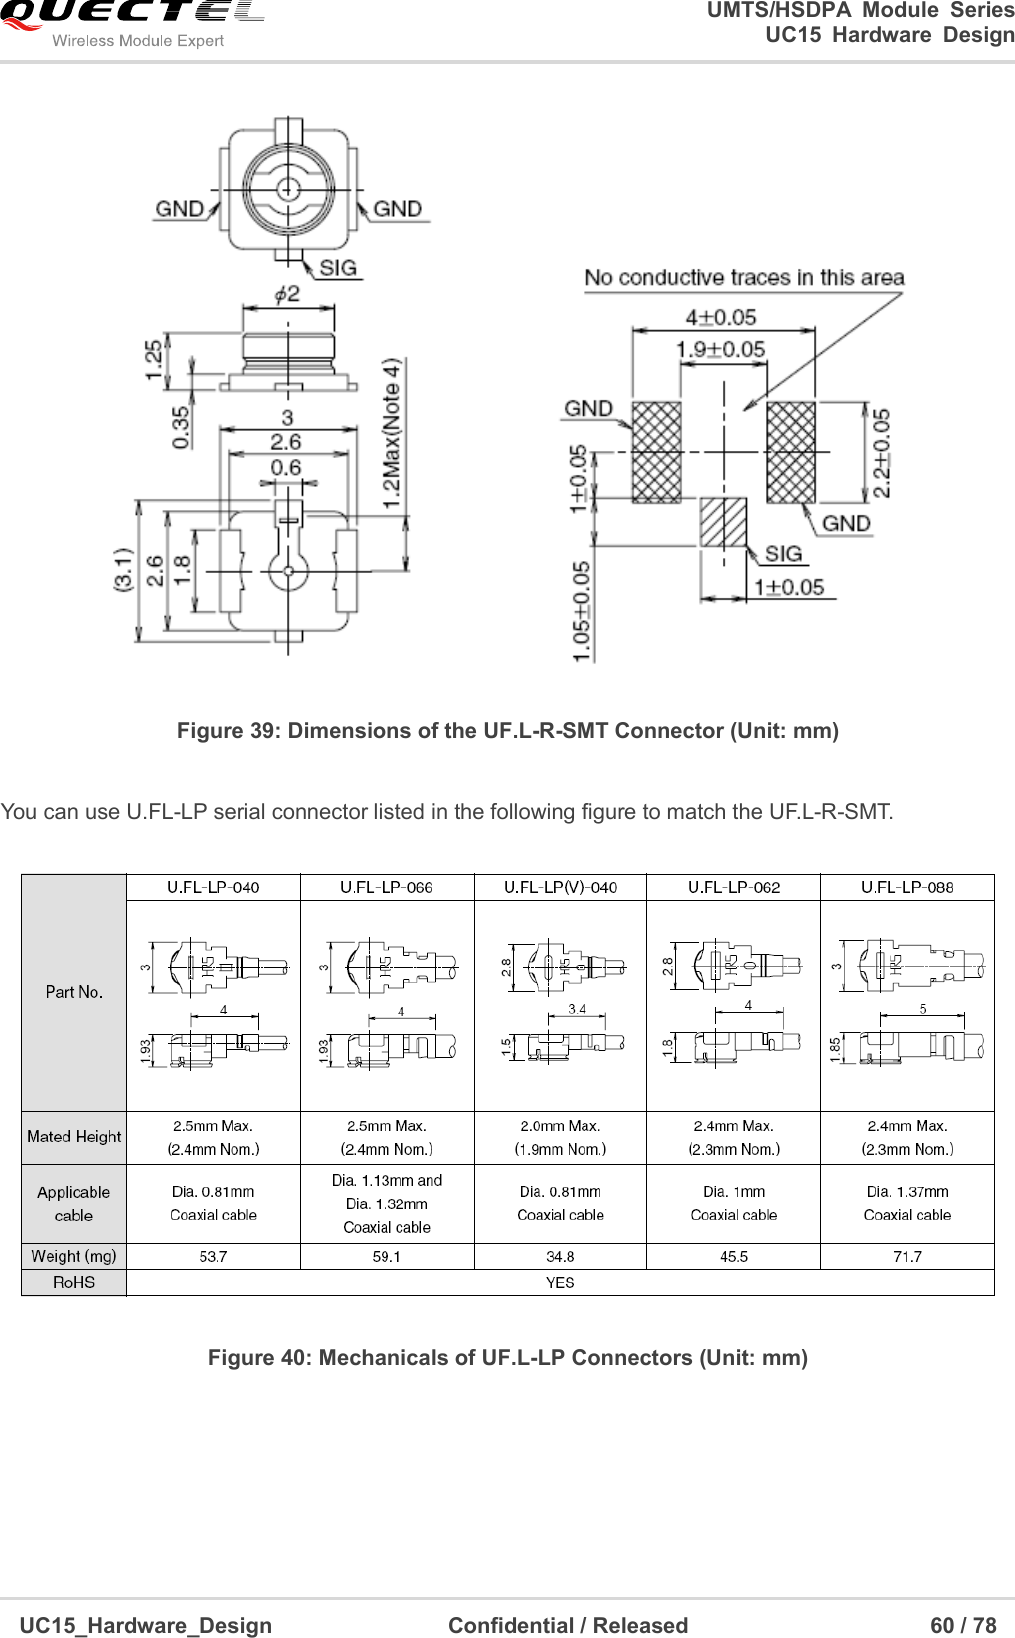                                                                        UMTS/HSDPA  Module  Series                                                                 UC15 Hardware Design  UC15_Hardware_Design                                Confidential / Released                                            60 / 78     Figure 39: Dimensions of the UF.L-R-SMT Connector (Unit: mm)  You can use U.FL-LP serial connector listed in the following figure to match the UF.L-R-SMT.  Figure 40: Mechanicals of UF.L-LP Connectors (Unit: mm)      